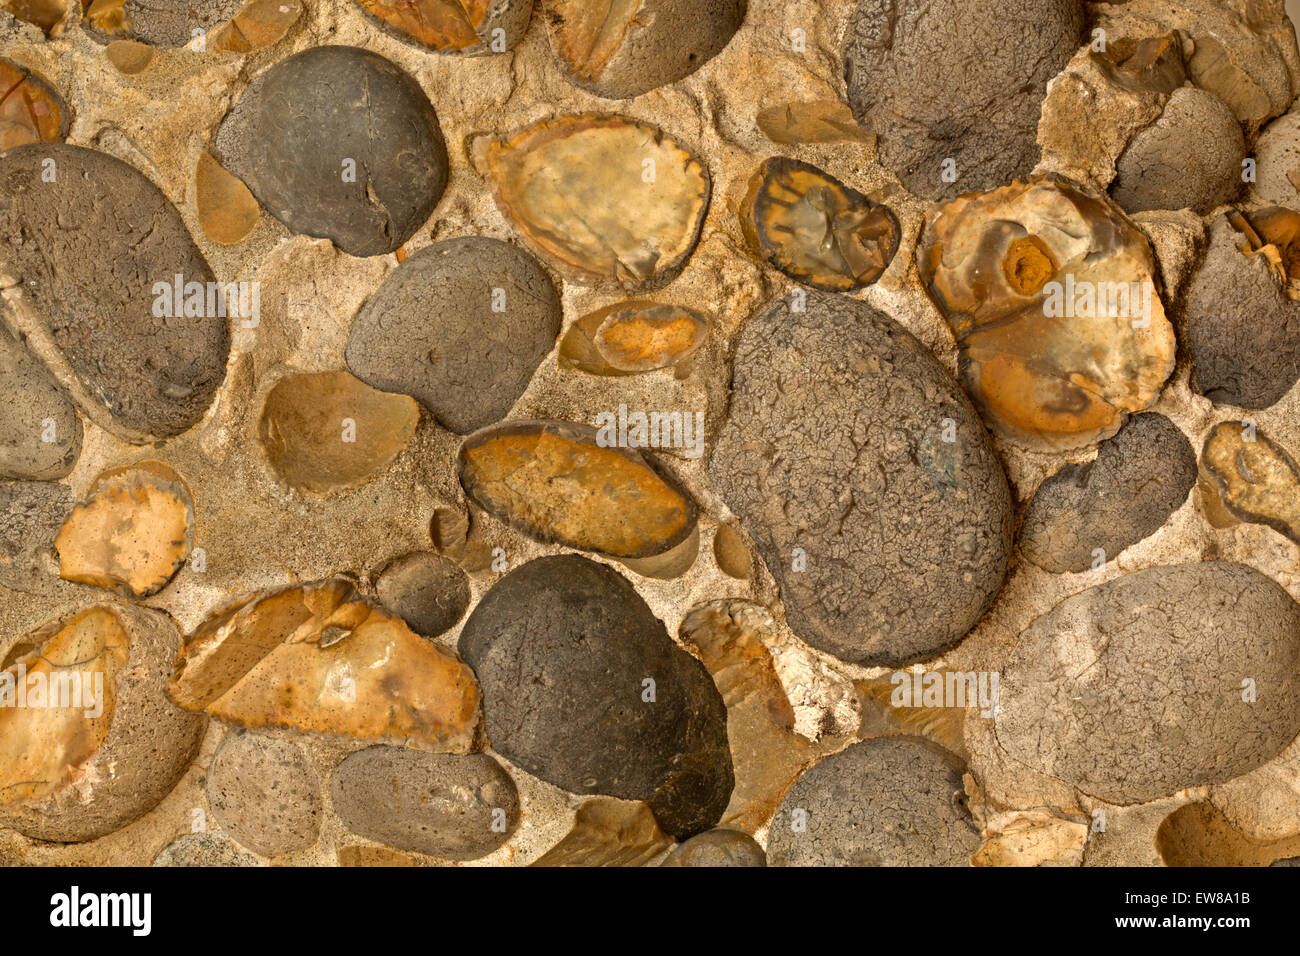 Hertfordshire puddingstone, Type of conglomerate, Hertfordshire , England, much folklore surrounds this sedimentary rock Stock Photo